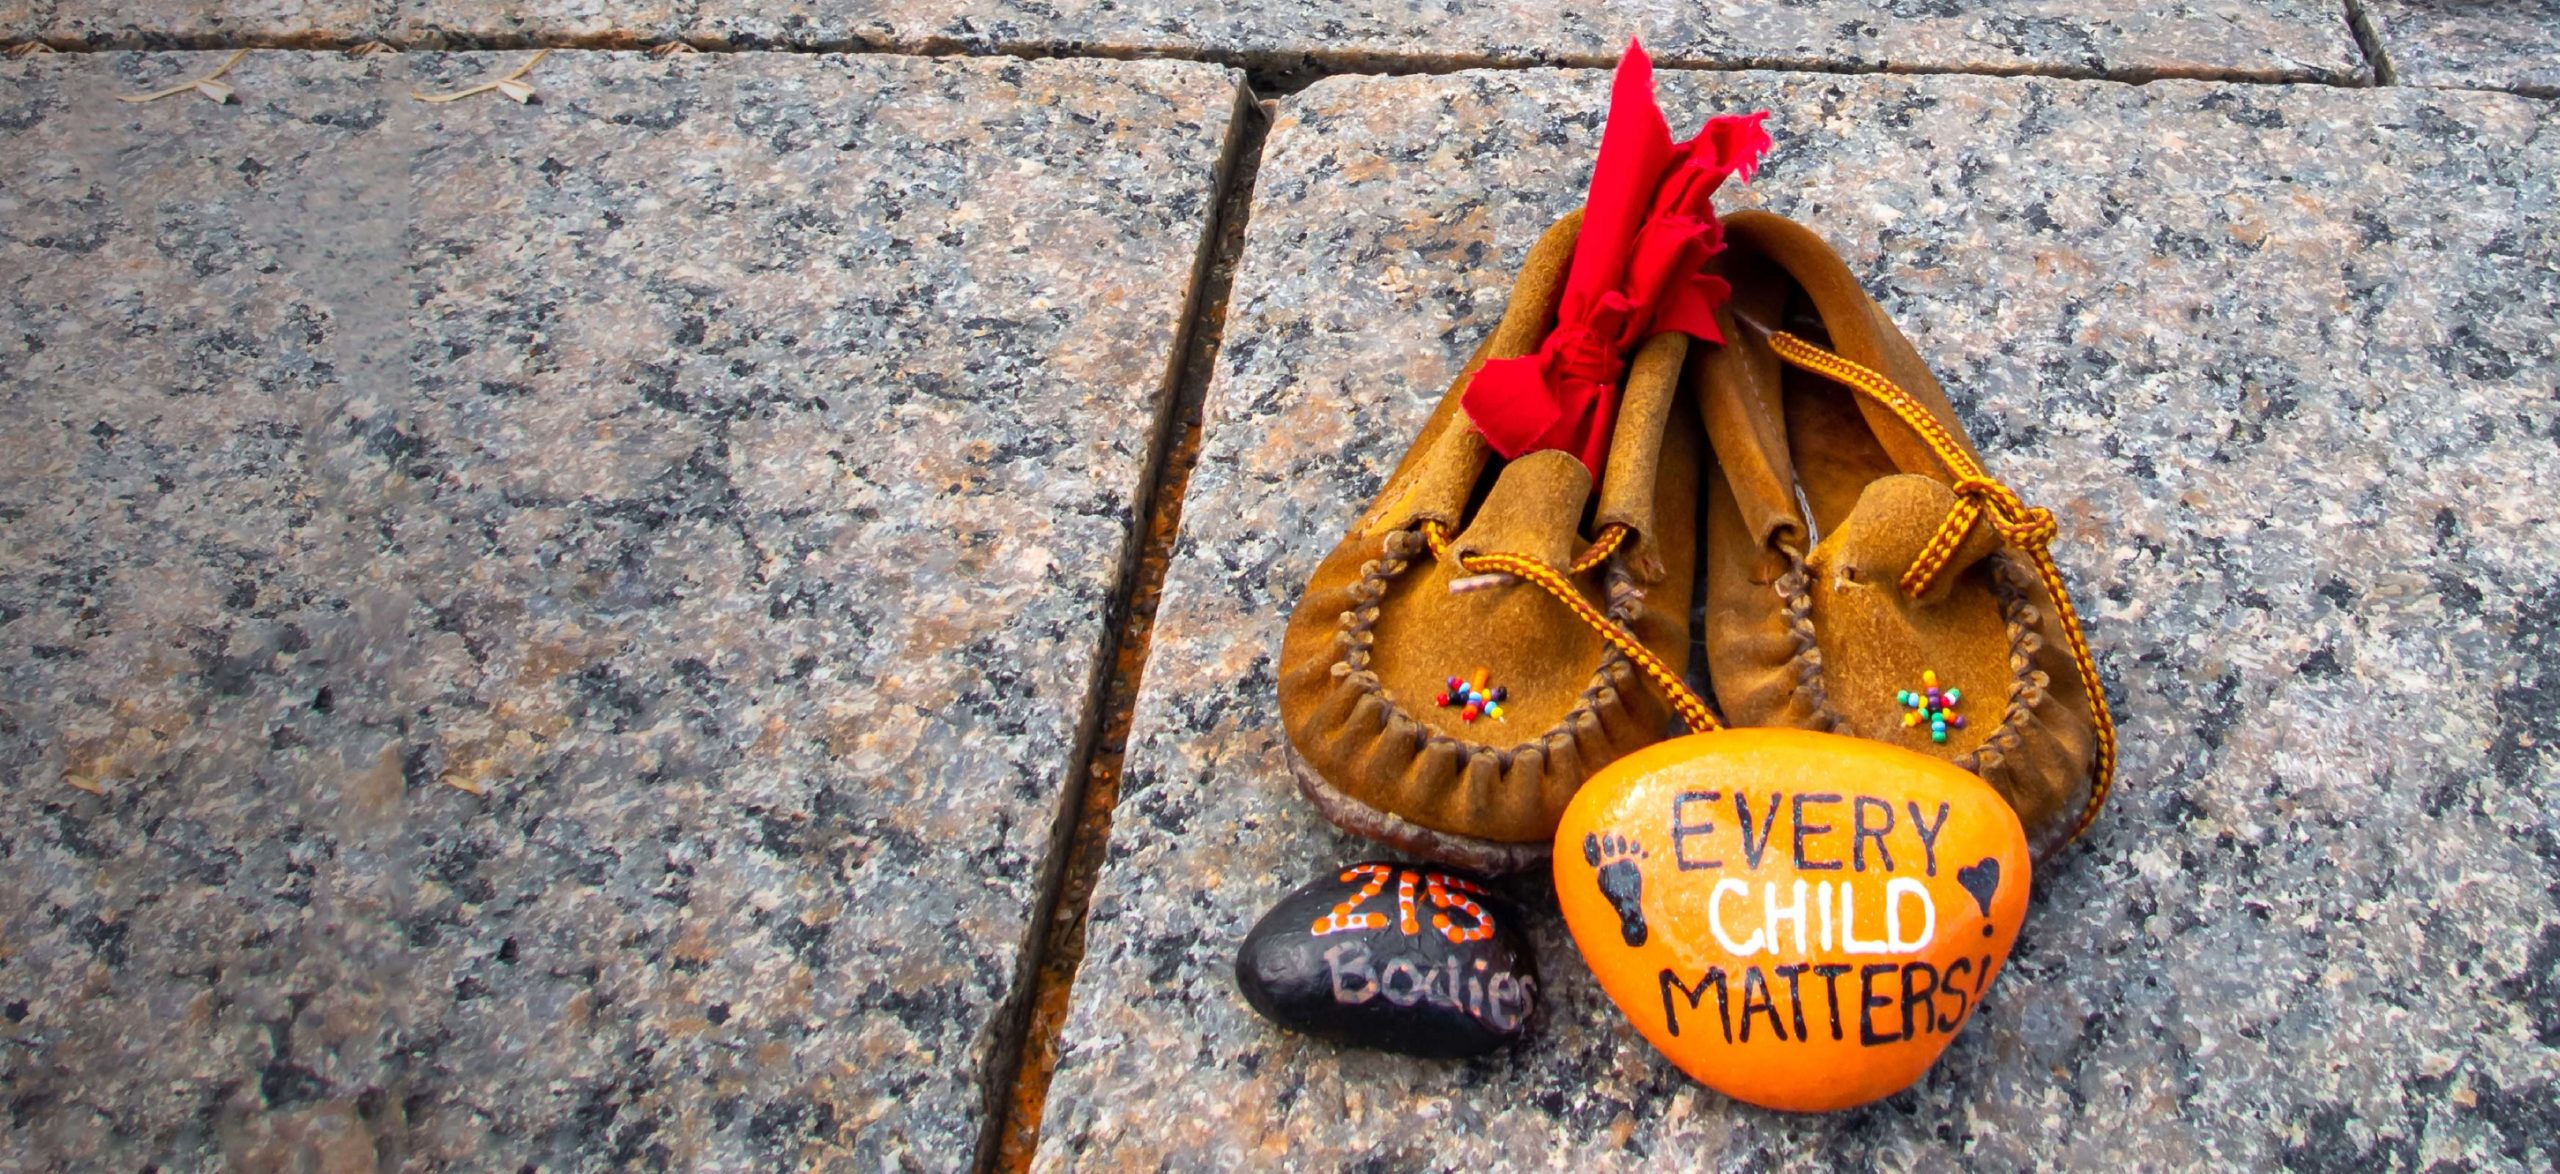 Children's shoes and a painted orange rock that reads "Every Child Matters" site at a memorial at Canada's Parliament Hill for Indigenous children who were sent to residential schools